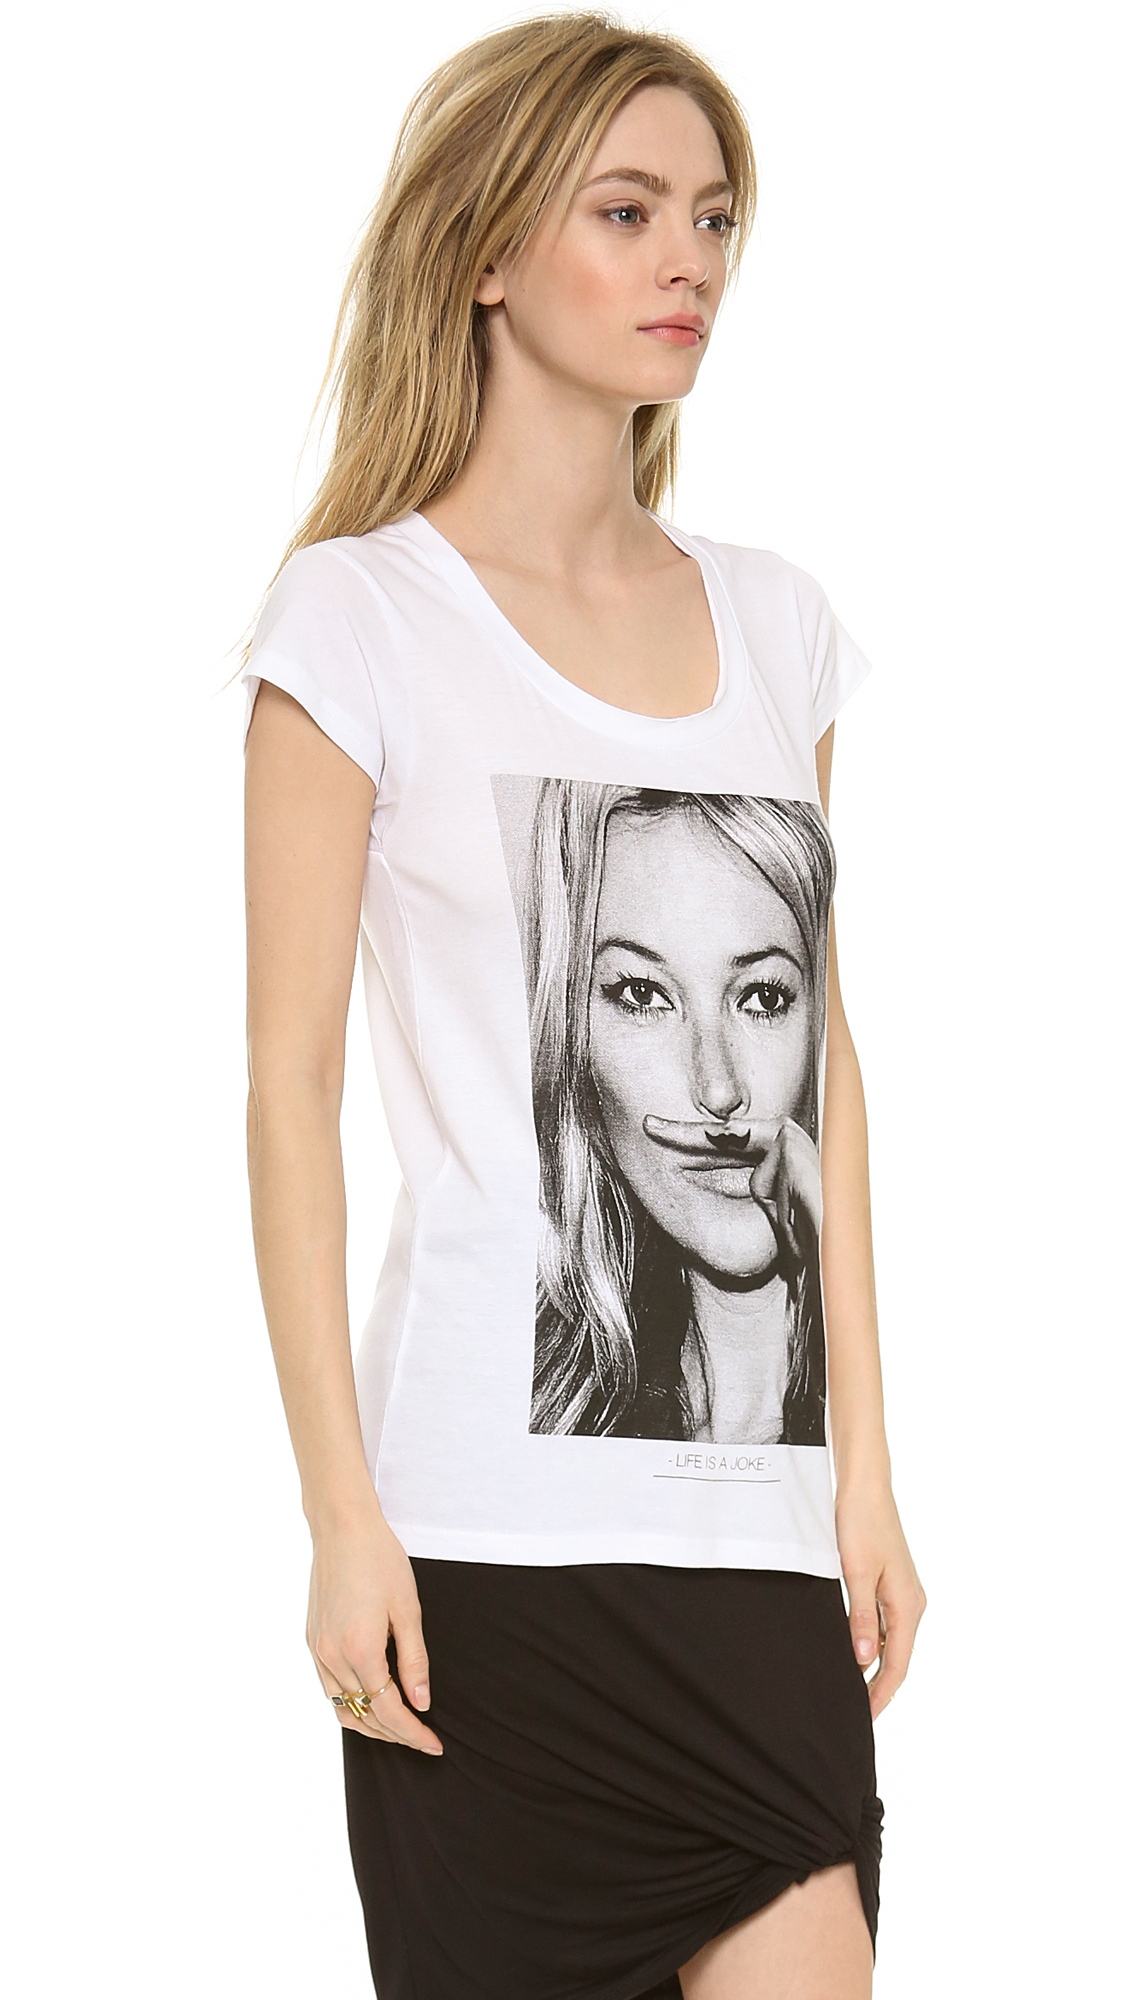 Lyst - Eleven paris Kate Moss Tee in White